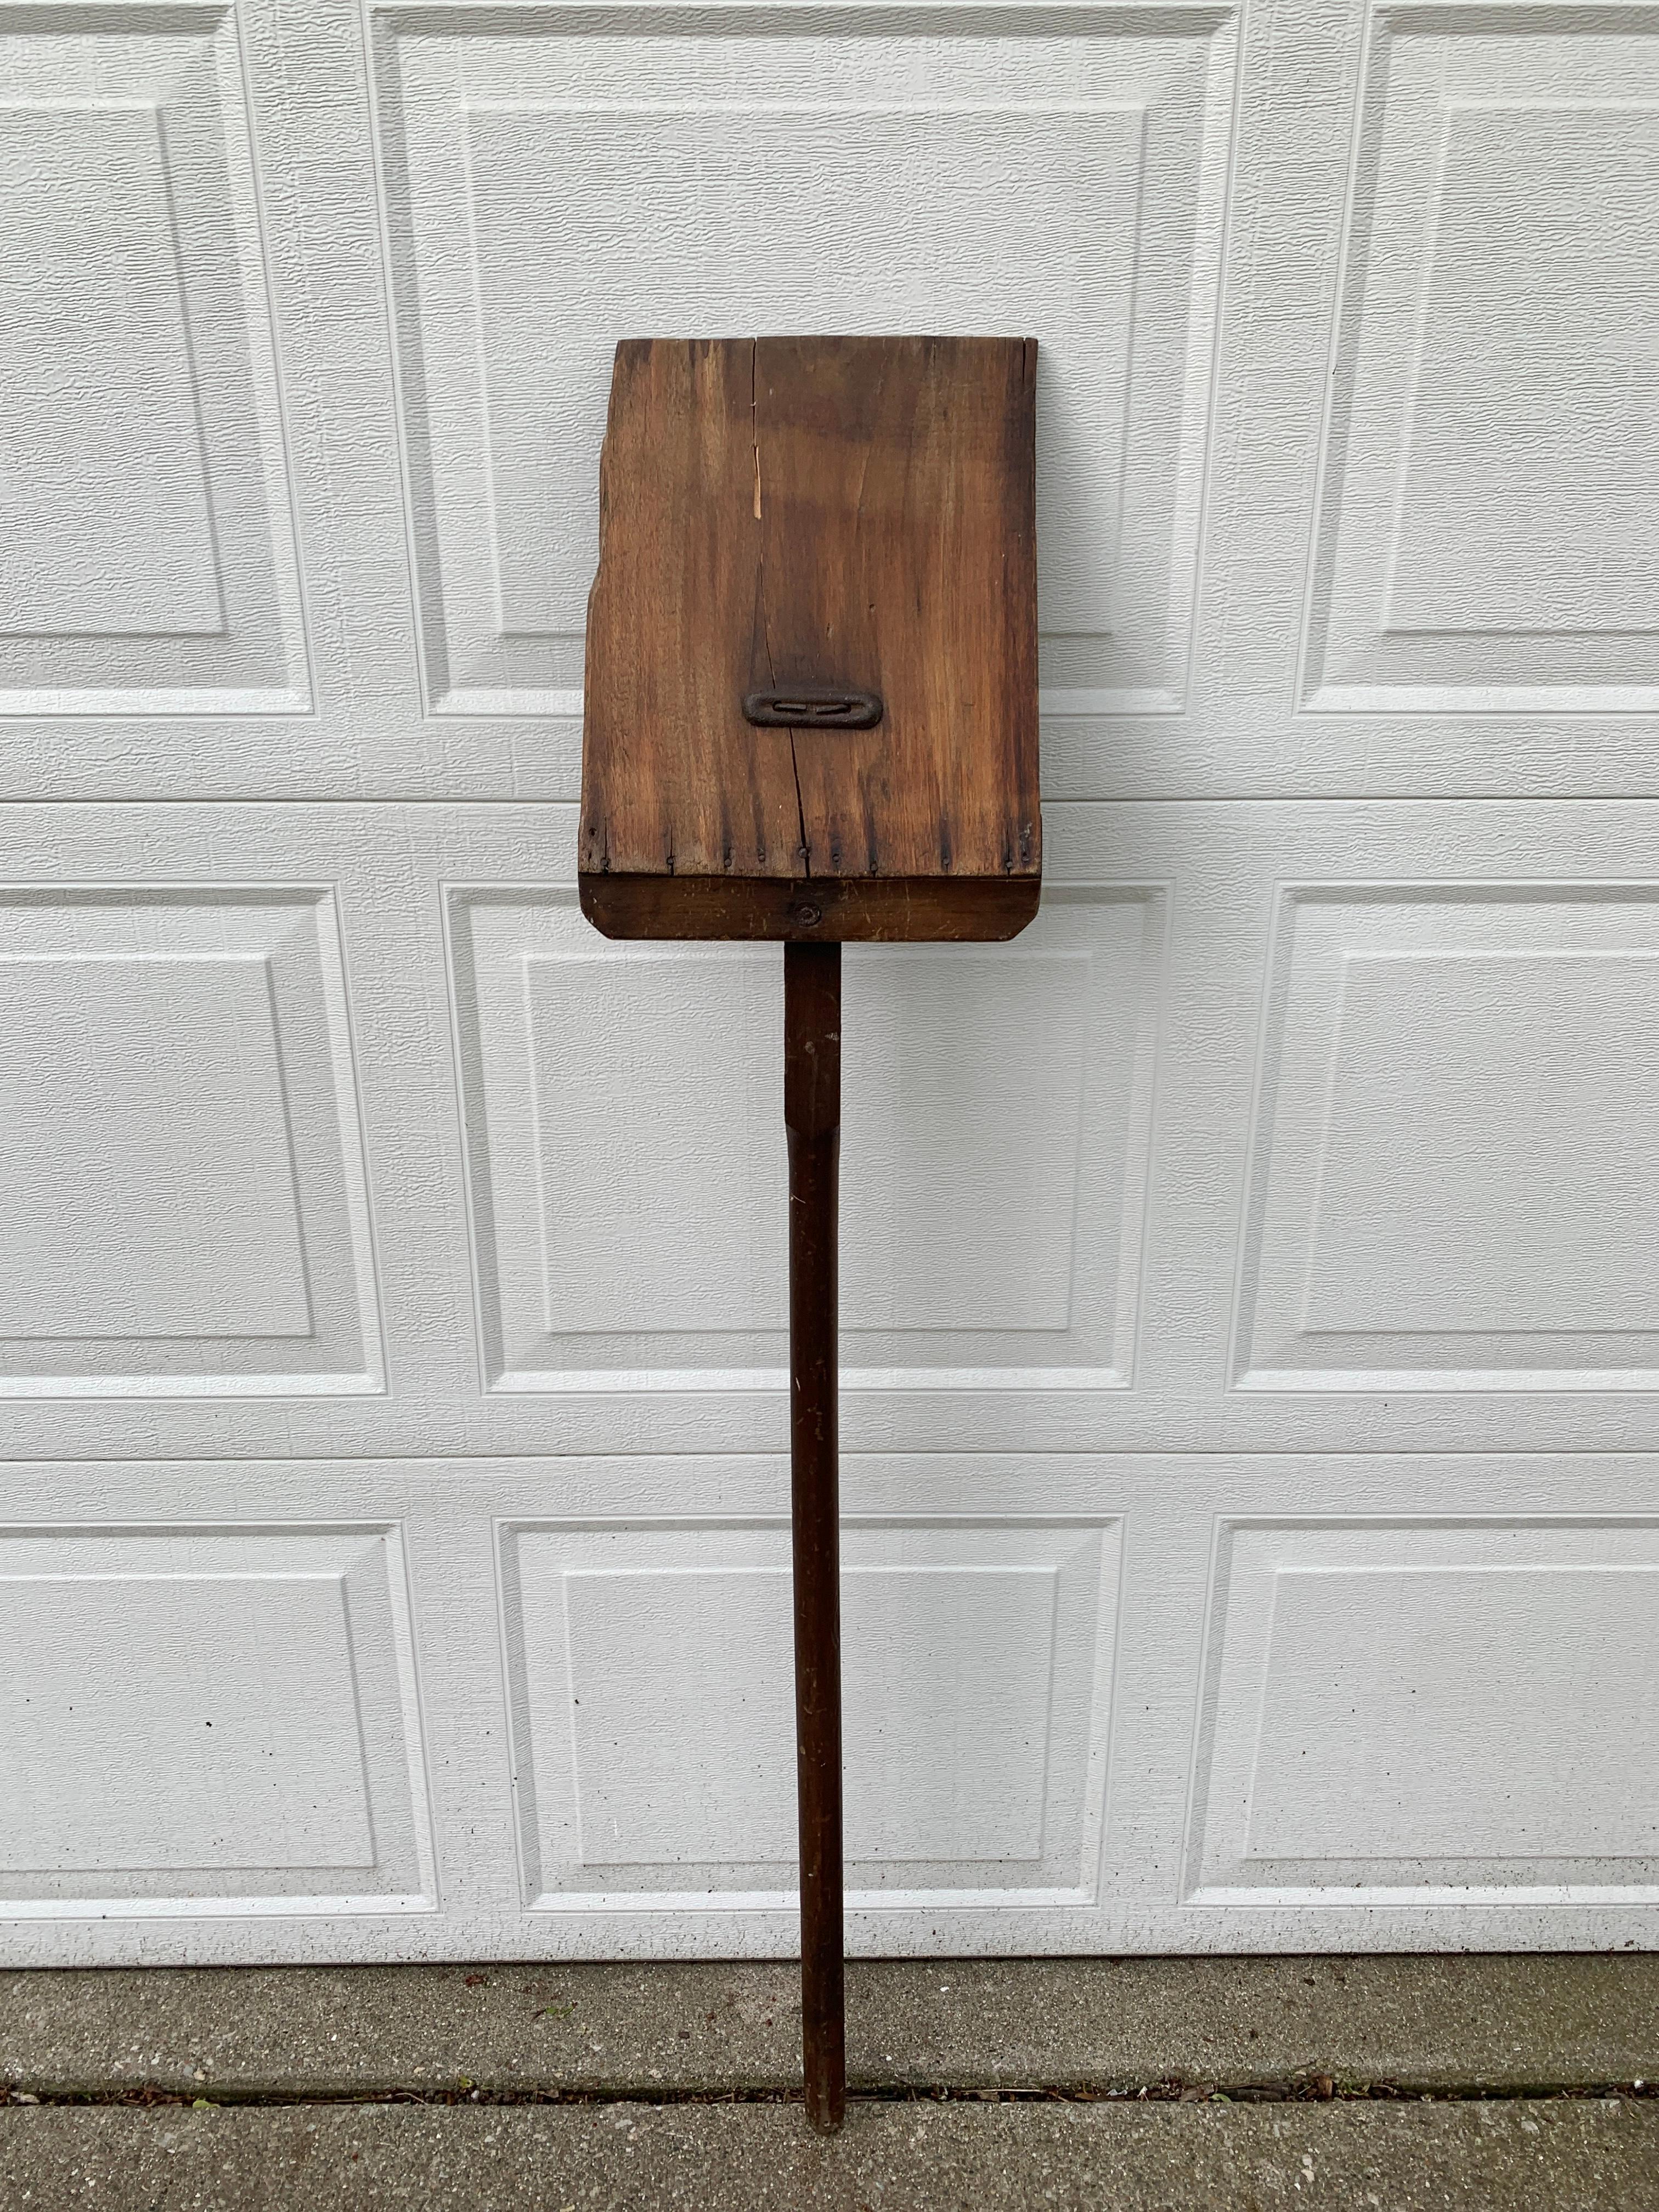 American Antique 19th Century Hand Made Wooden Grain Shovel For Sale